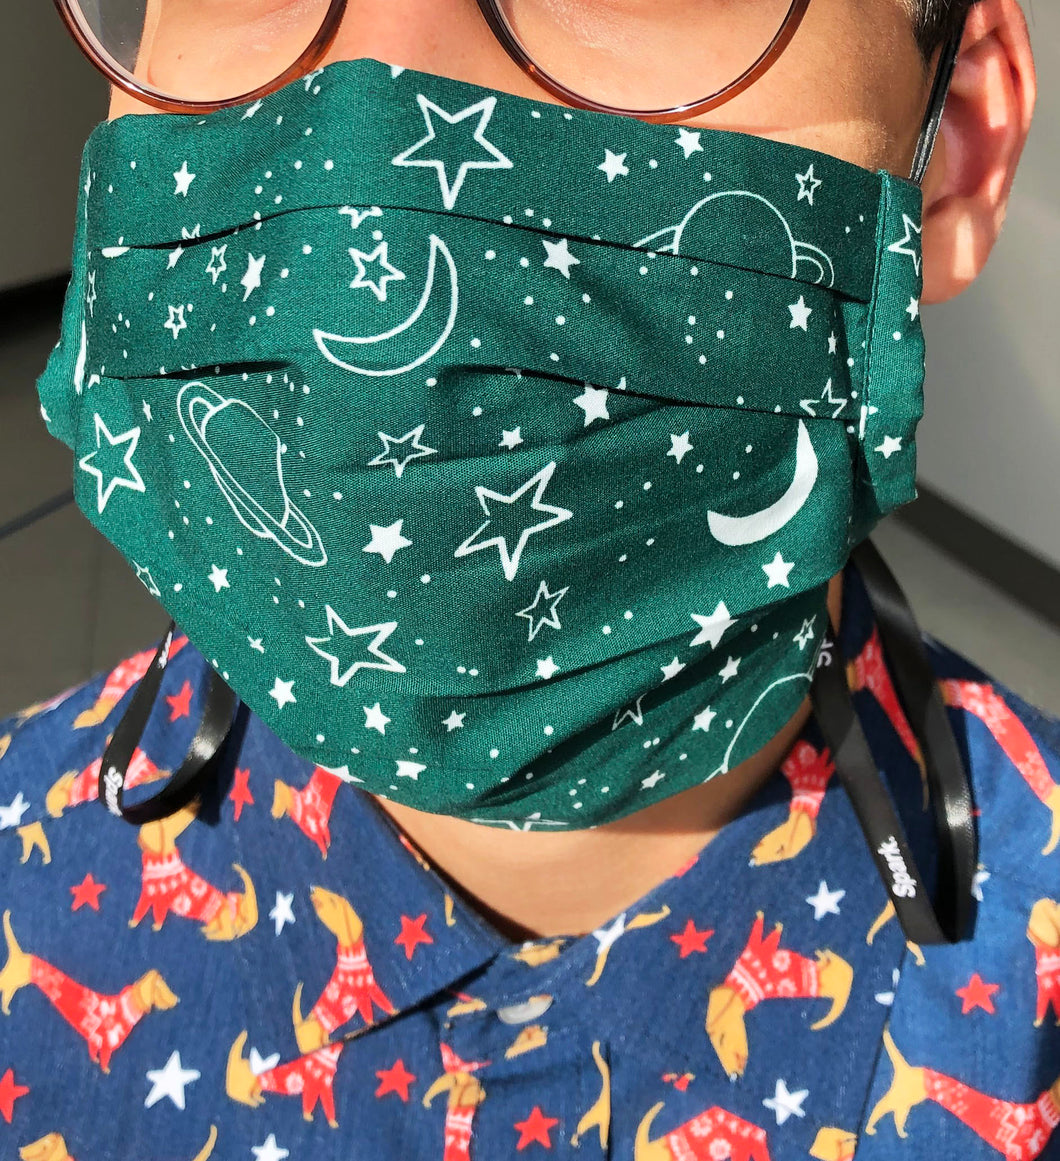 TELUS spark green galaxy mask adult masks prevent the spread covid-19 coronavirus cotton poplin mask two layers pocket fliter adjustable elastic bands nose wire neck ribbon accessory pleated